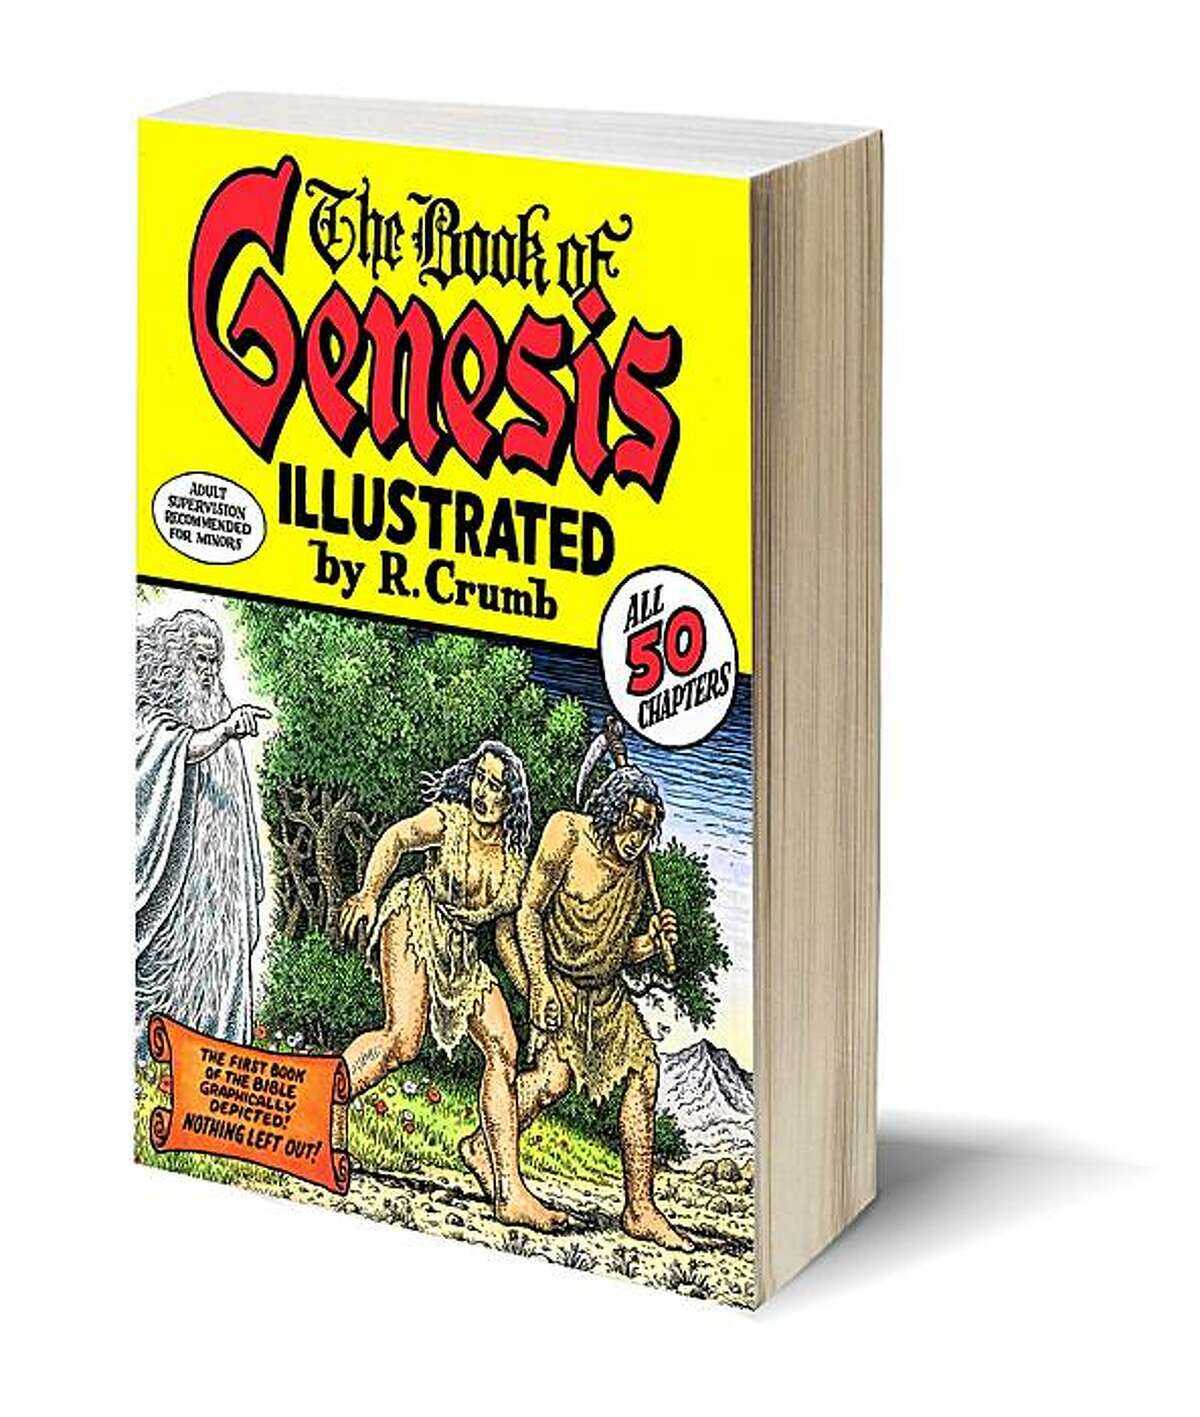 Book cover from R. Crumb's long-awaited The Book of Genesis, a word-for-word adaptation of the Bible Illustrated by R. Crumb. Blank bookcover with clipping path